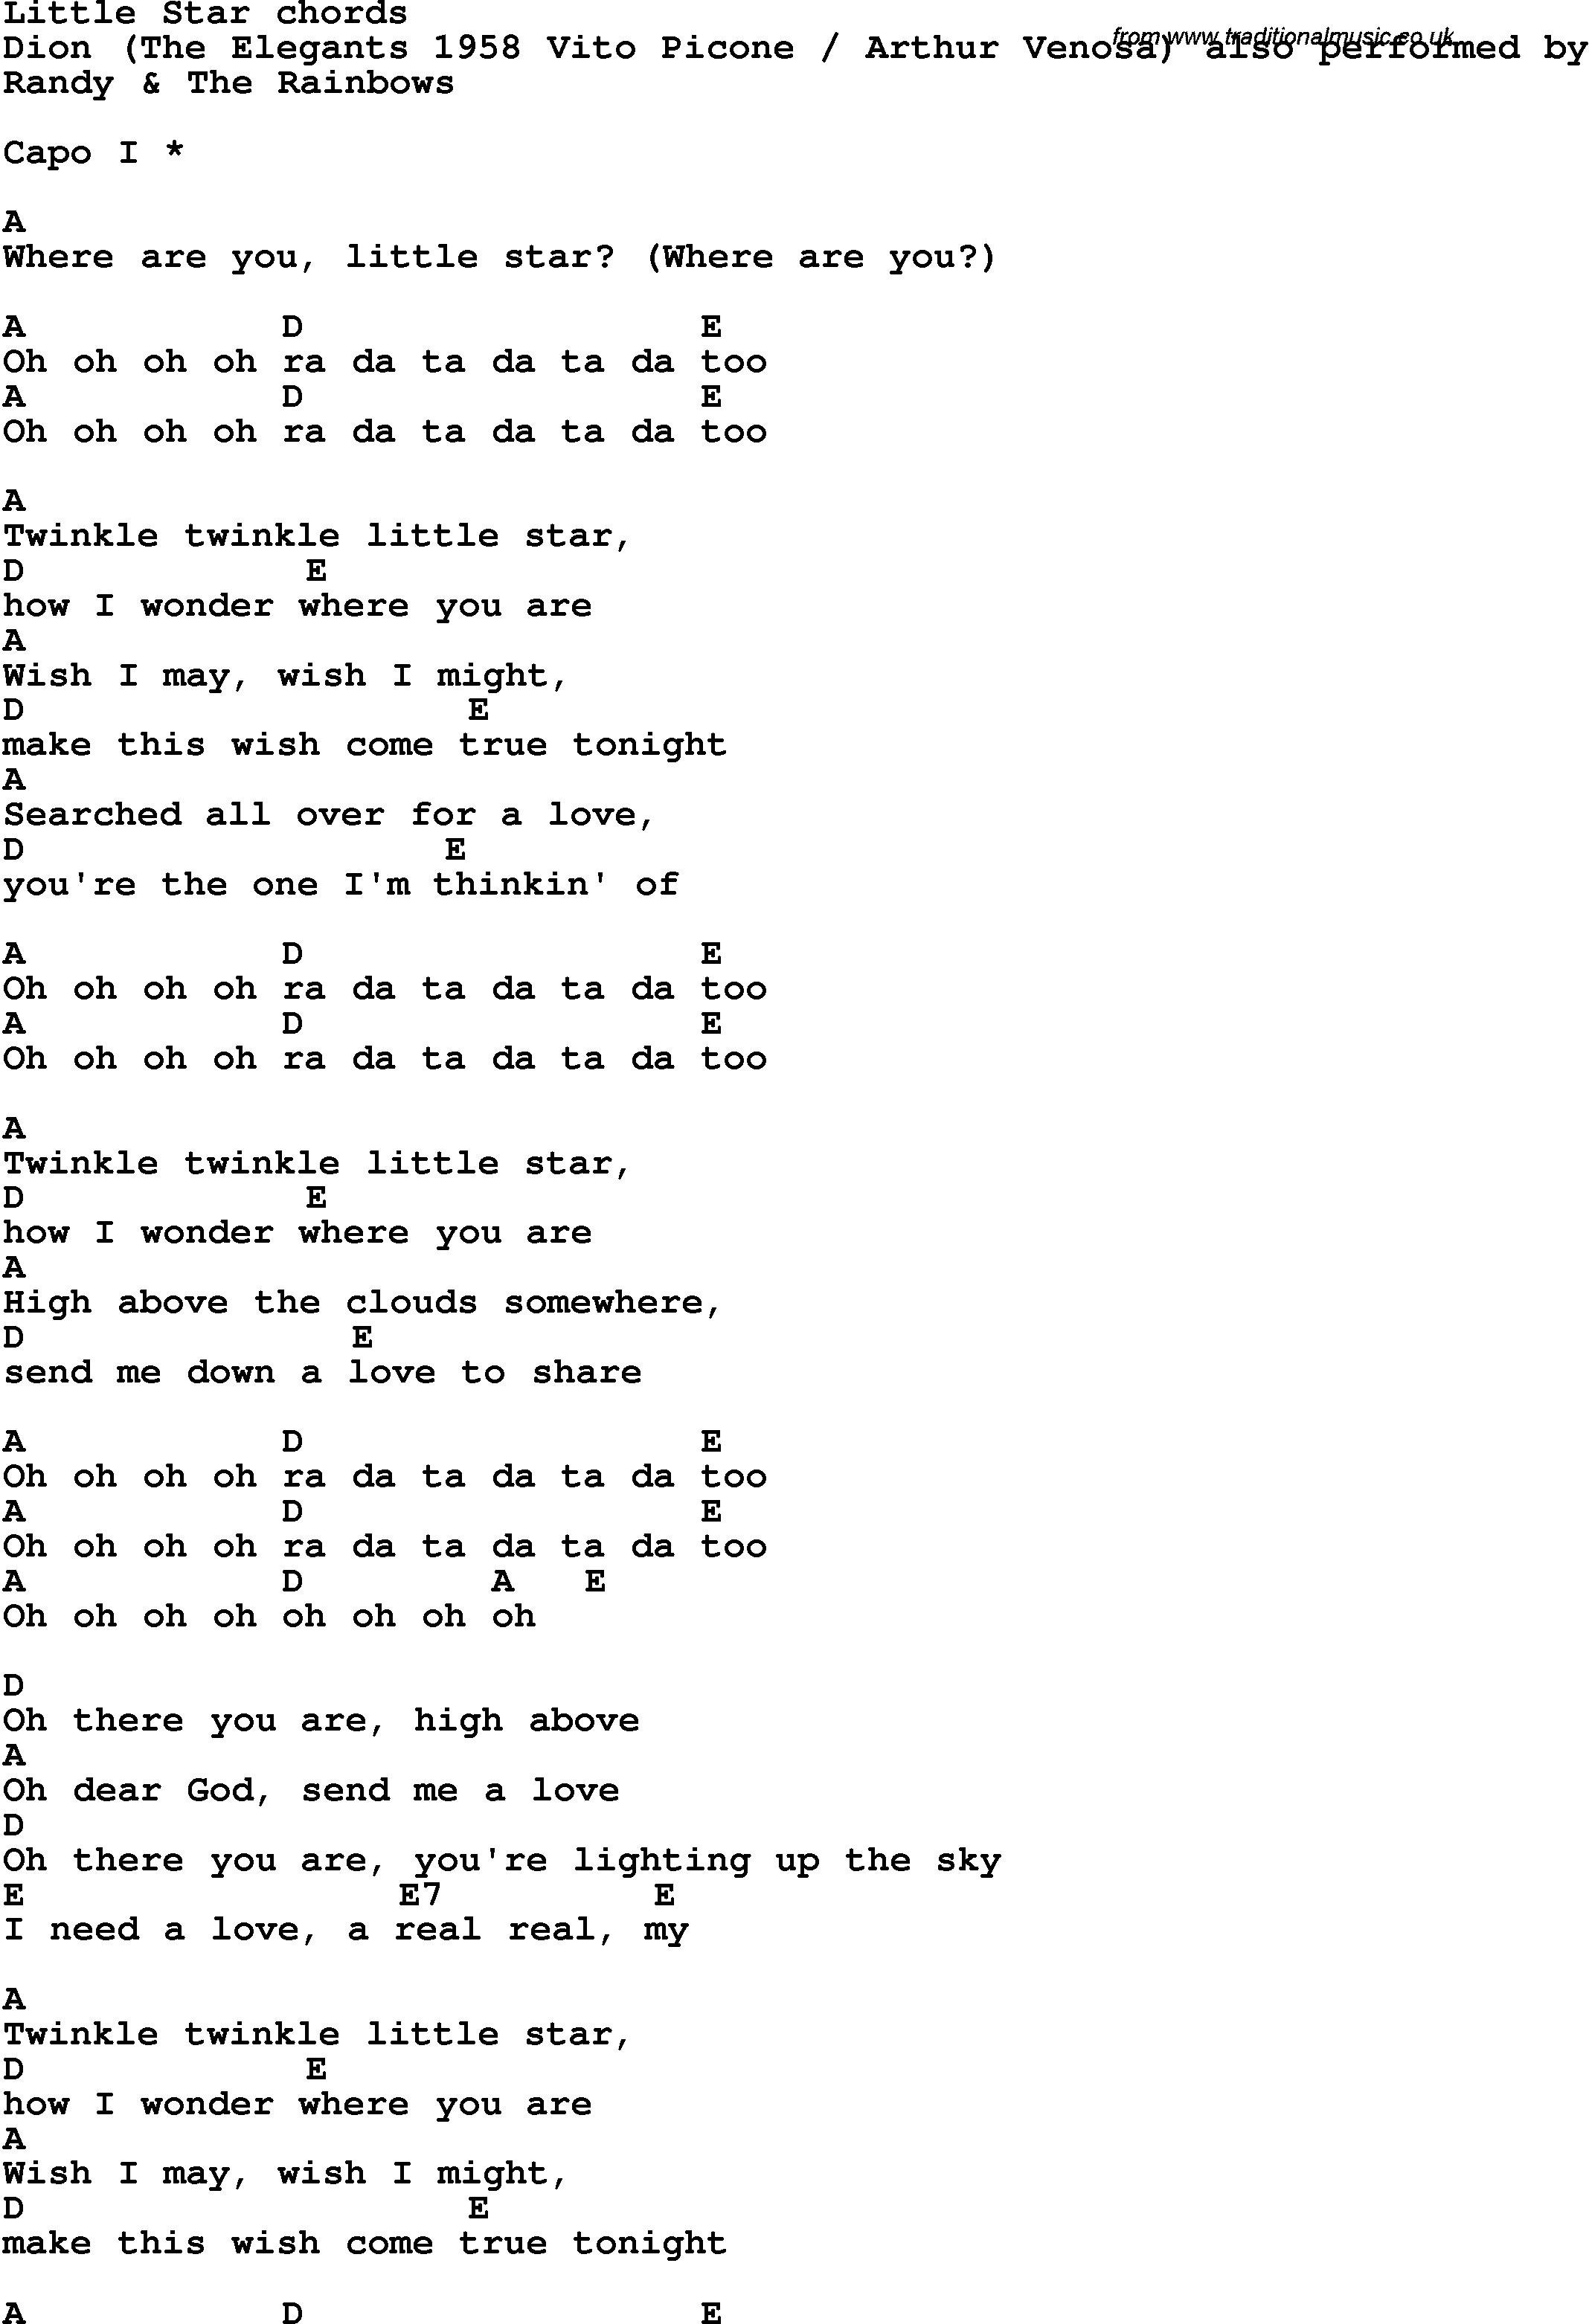 Song Lyrics with guitar chords for Little Star